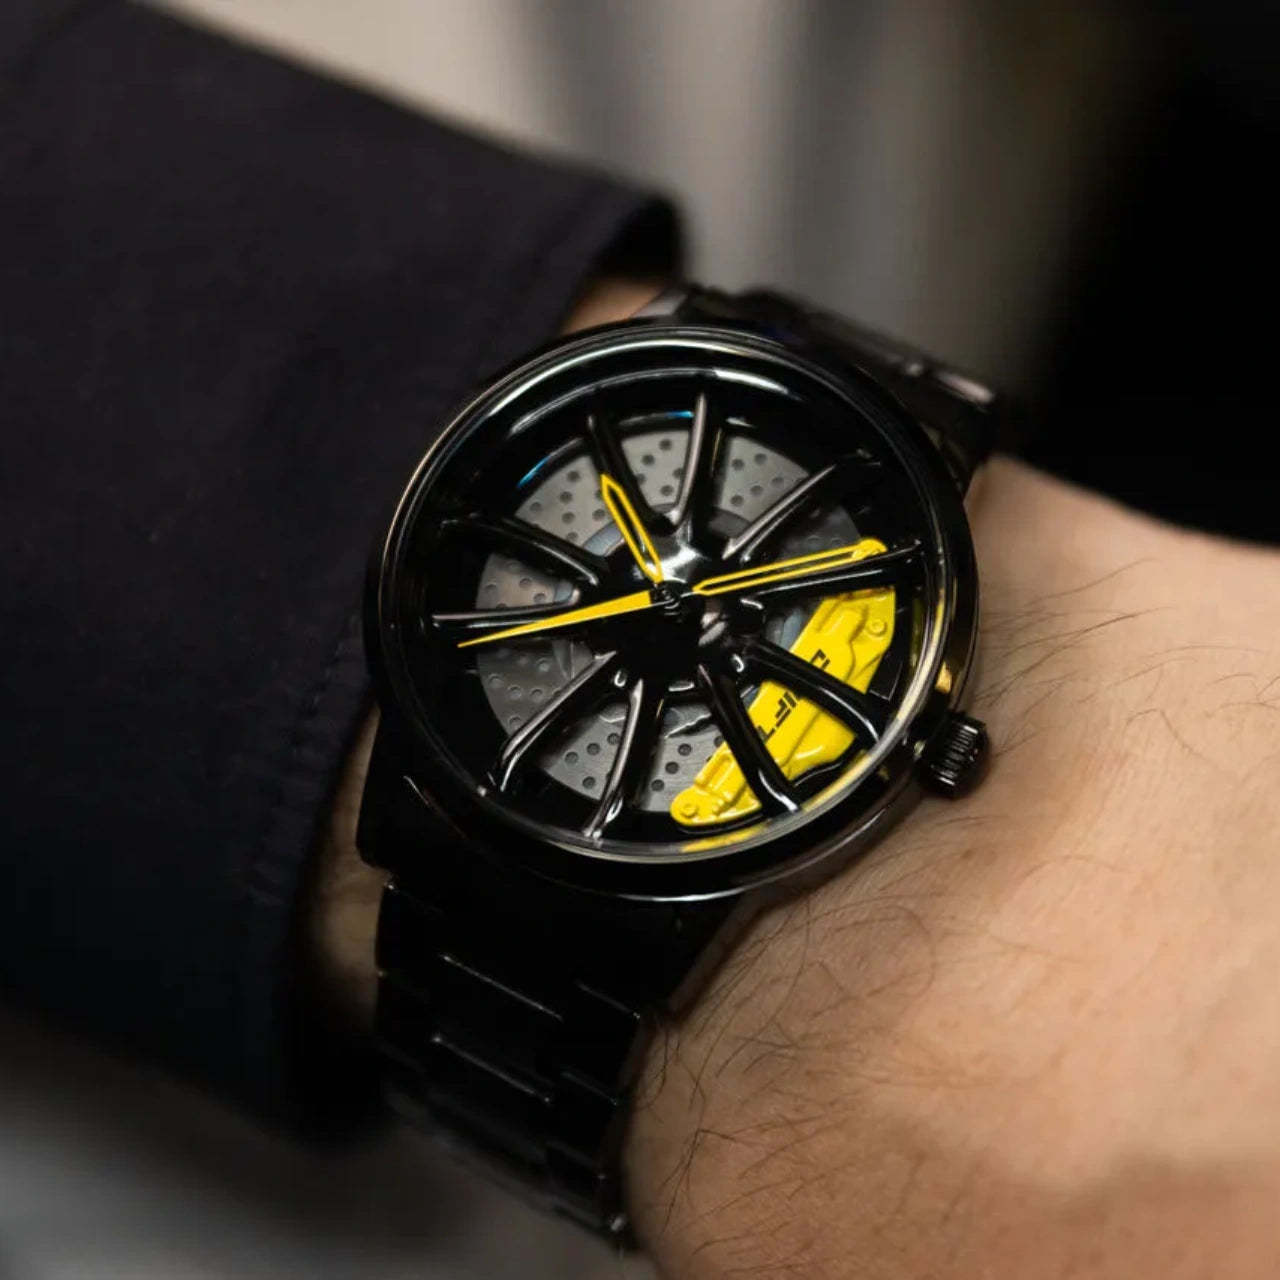 Rev up your auto fashion with our bold yellow Performance GT Rim Watch! Engineered by a German startup, these precision watches are the perfect choice for motorsport, tuning, and auto fans. Get ready to ignite your style! #id_46744365433162